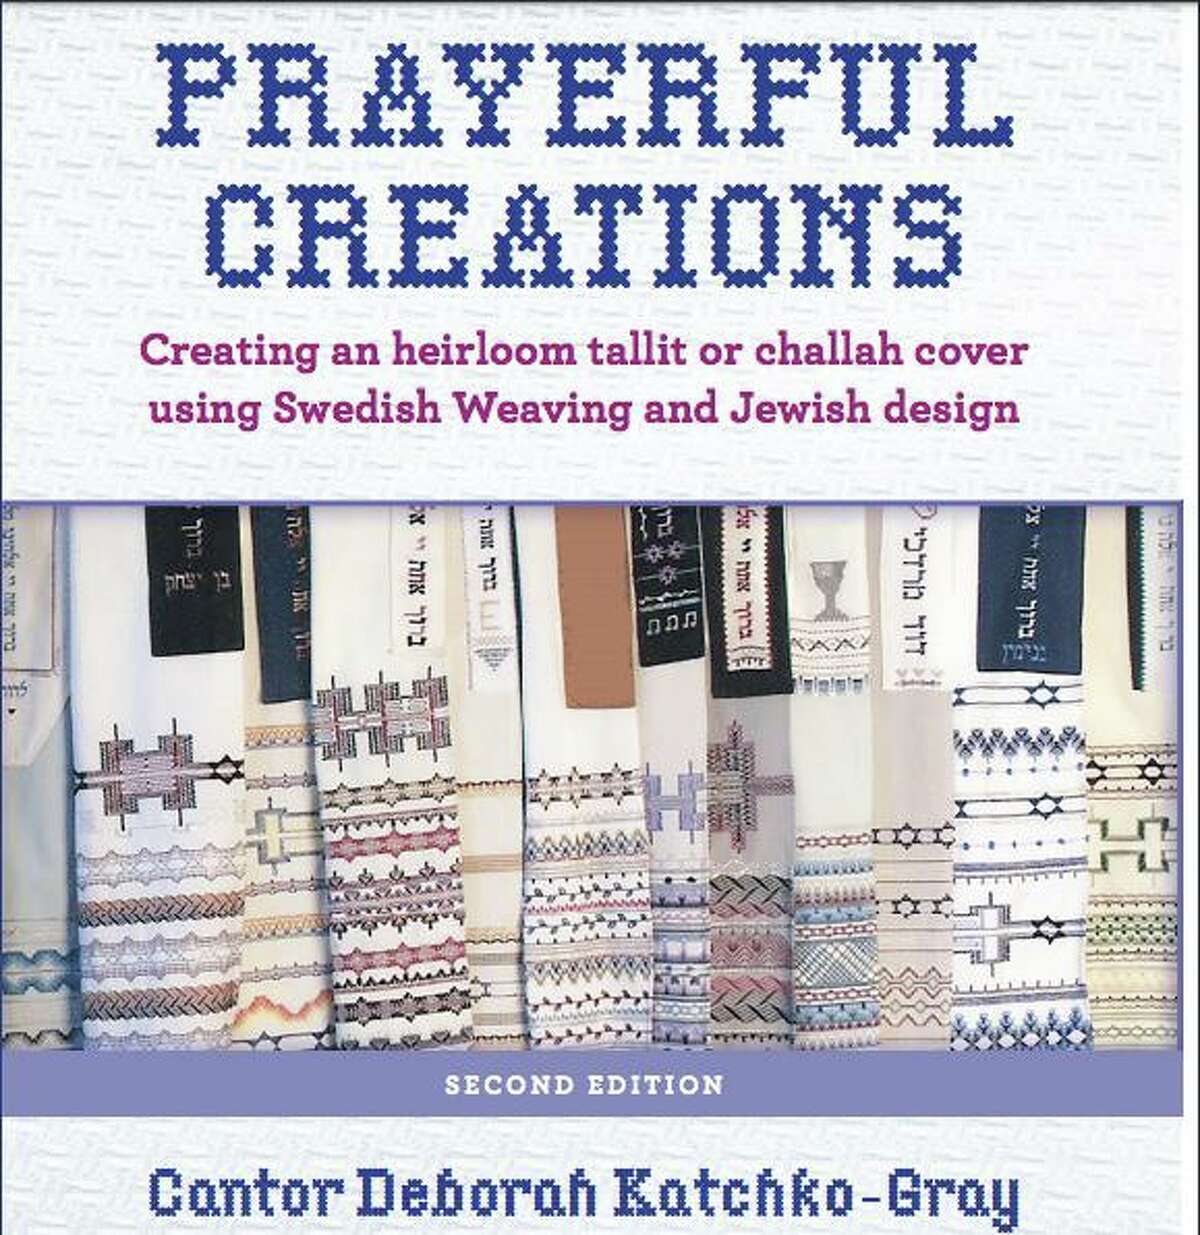 Cantor Deborah Katchko-Gray released the second edition of her book “Prayerful Creations: Jewish Designs for Creative Prayer Shawls and More” in September.